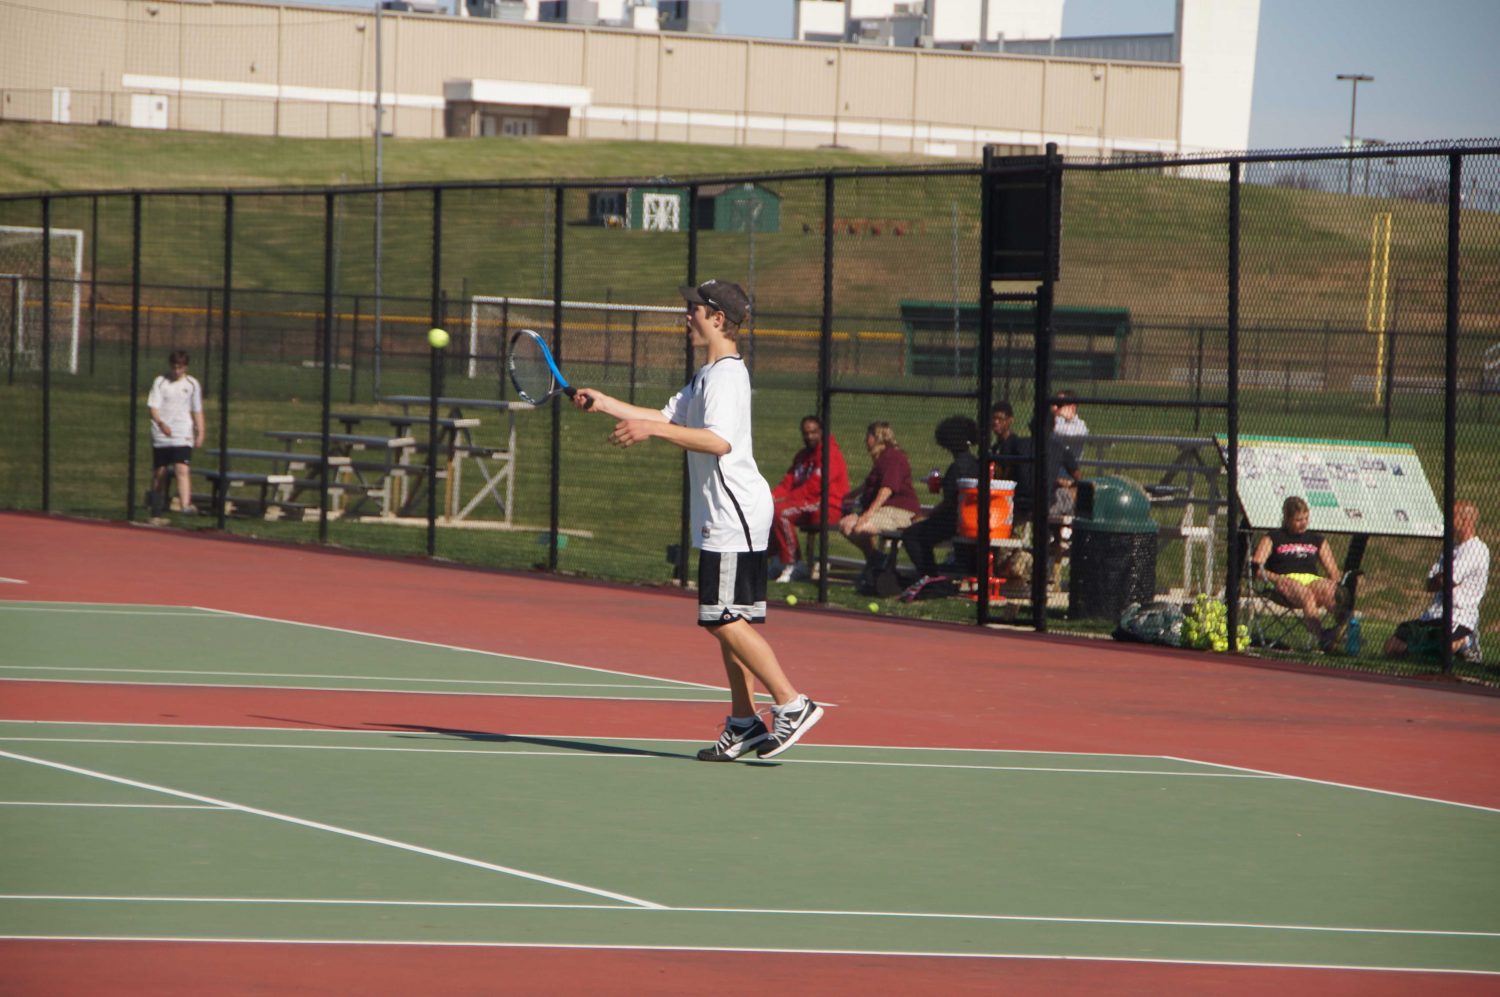 After Fridays win over Hazelwood East, the boys tennis team follows up with two road conference match-ups this week. Photo courtesy of Lisa Jett.